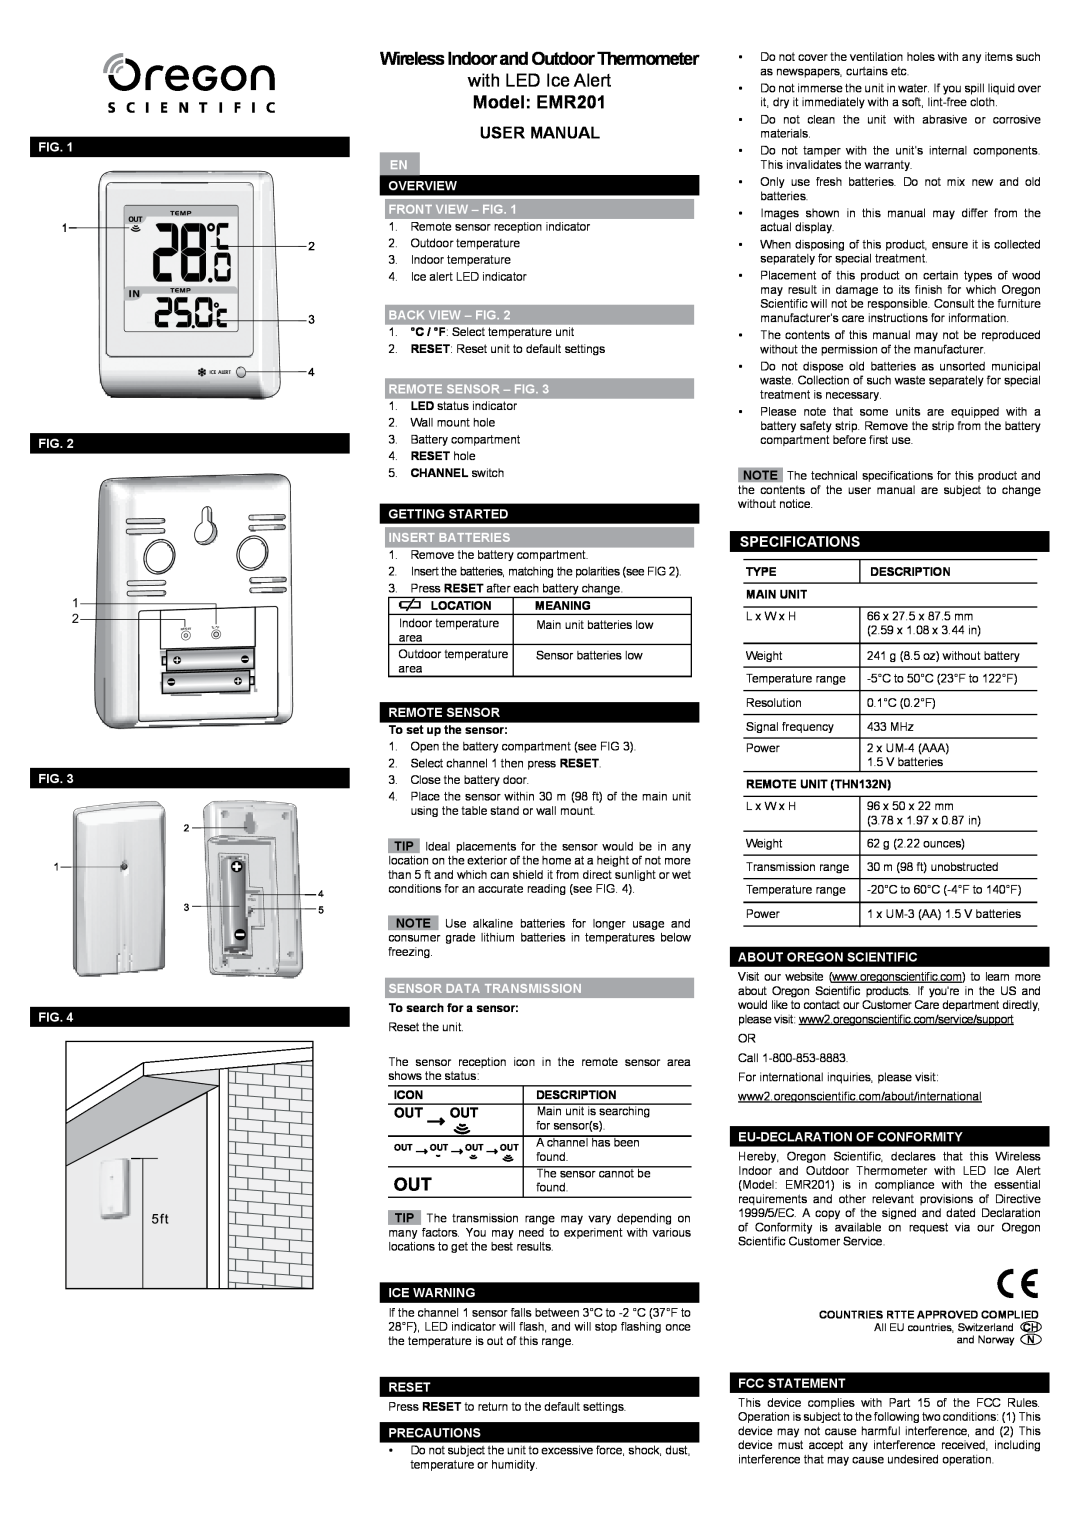 Oregon Scientific user manual with LED Ice Alert, Model EMR201, Wireless Indoor and Outdoor Thermometer, Specifications 